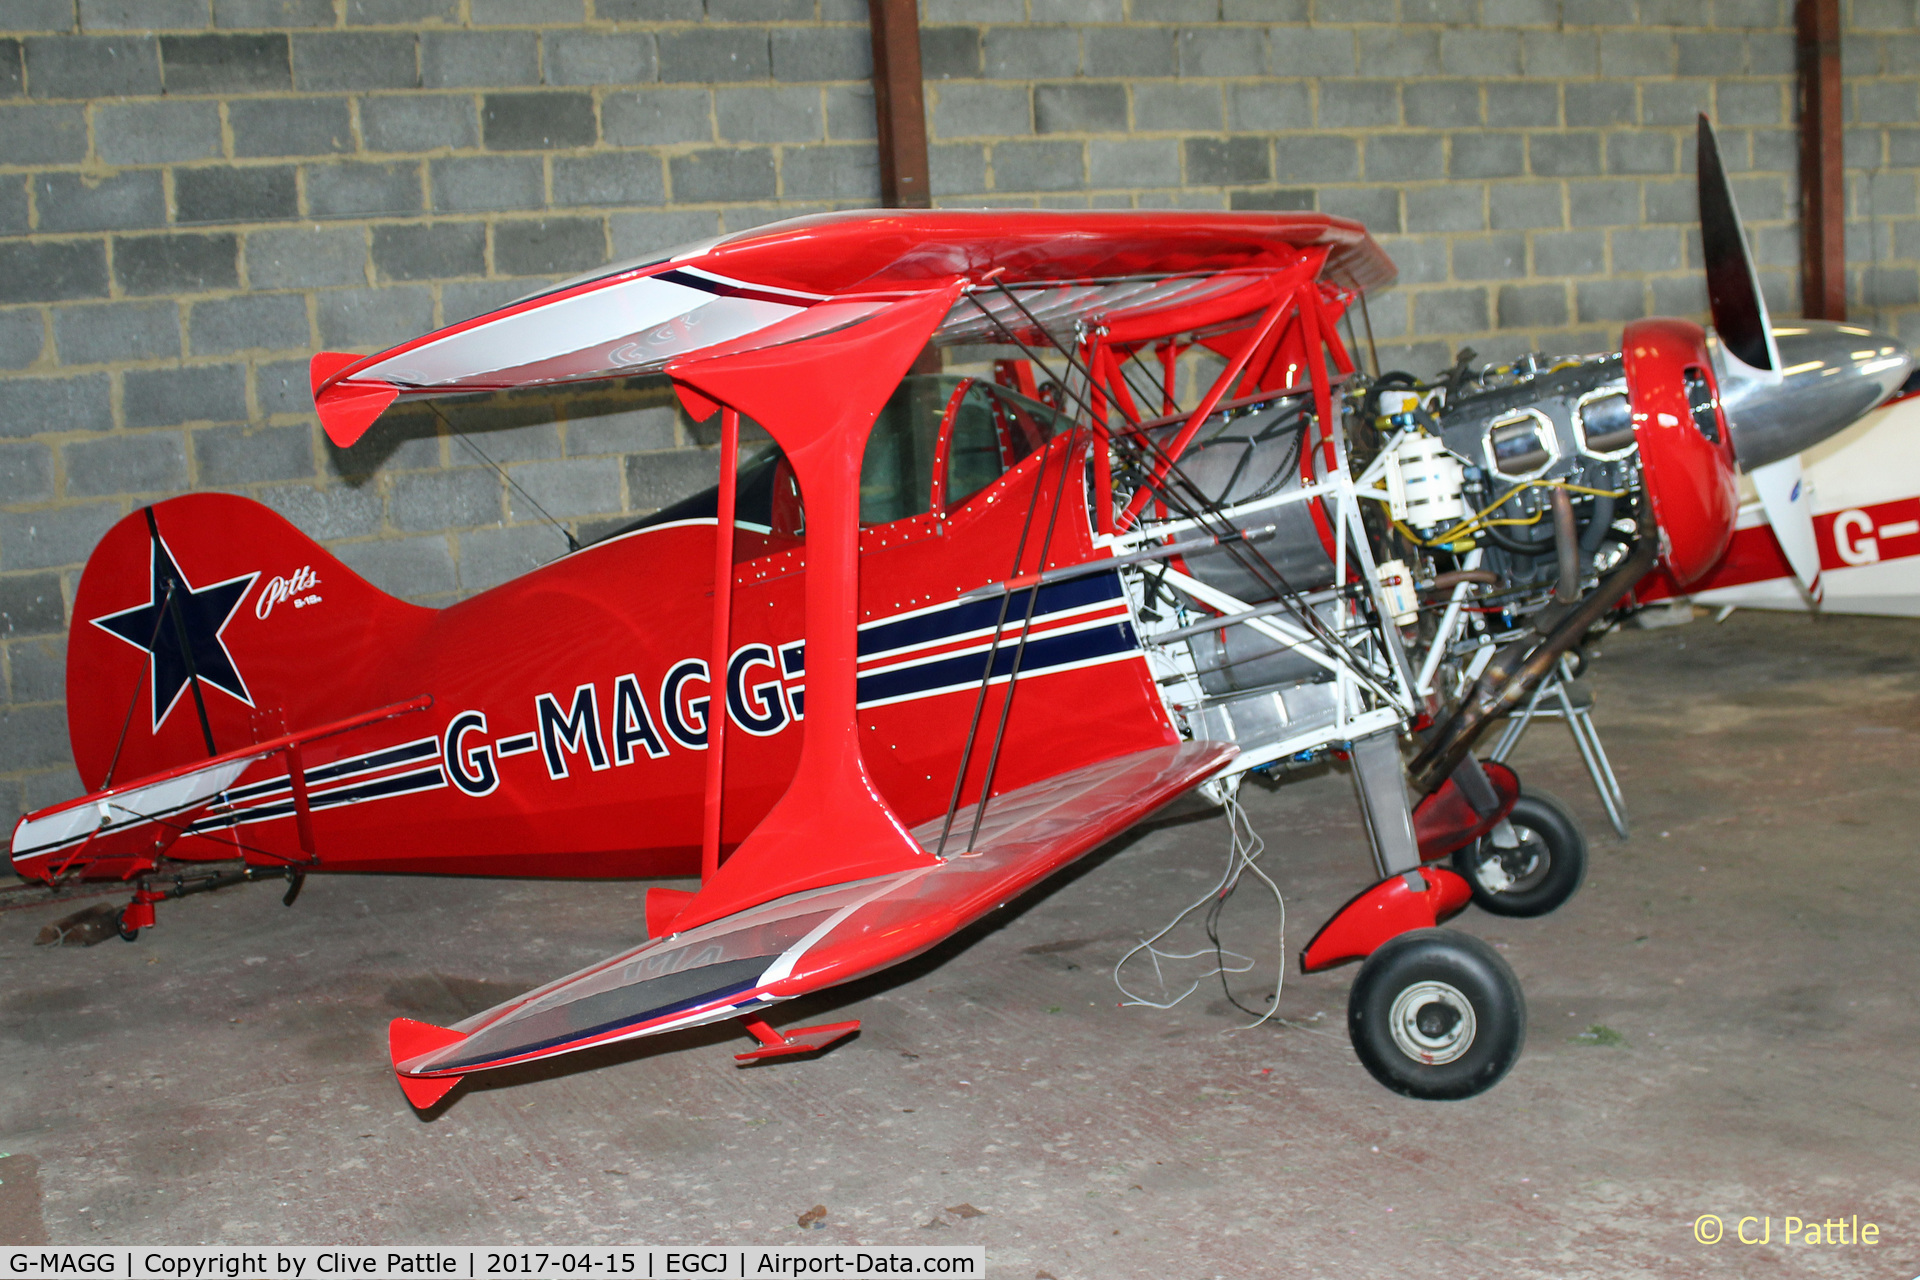 G-MAGG, 1983 Pitts S-1SE Special C/N PFA 009-10873, Hangared at EGCJ